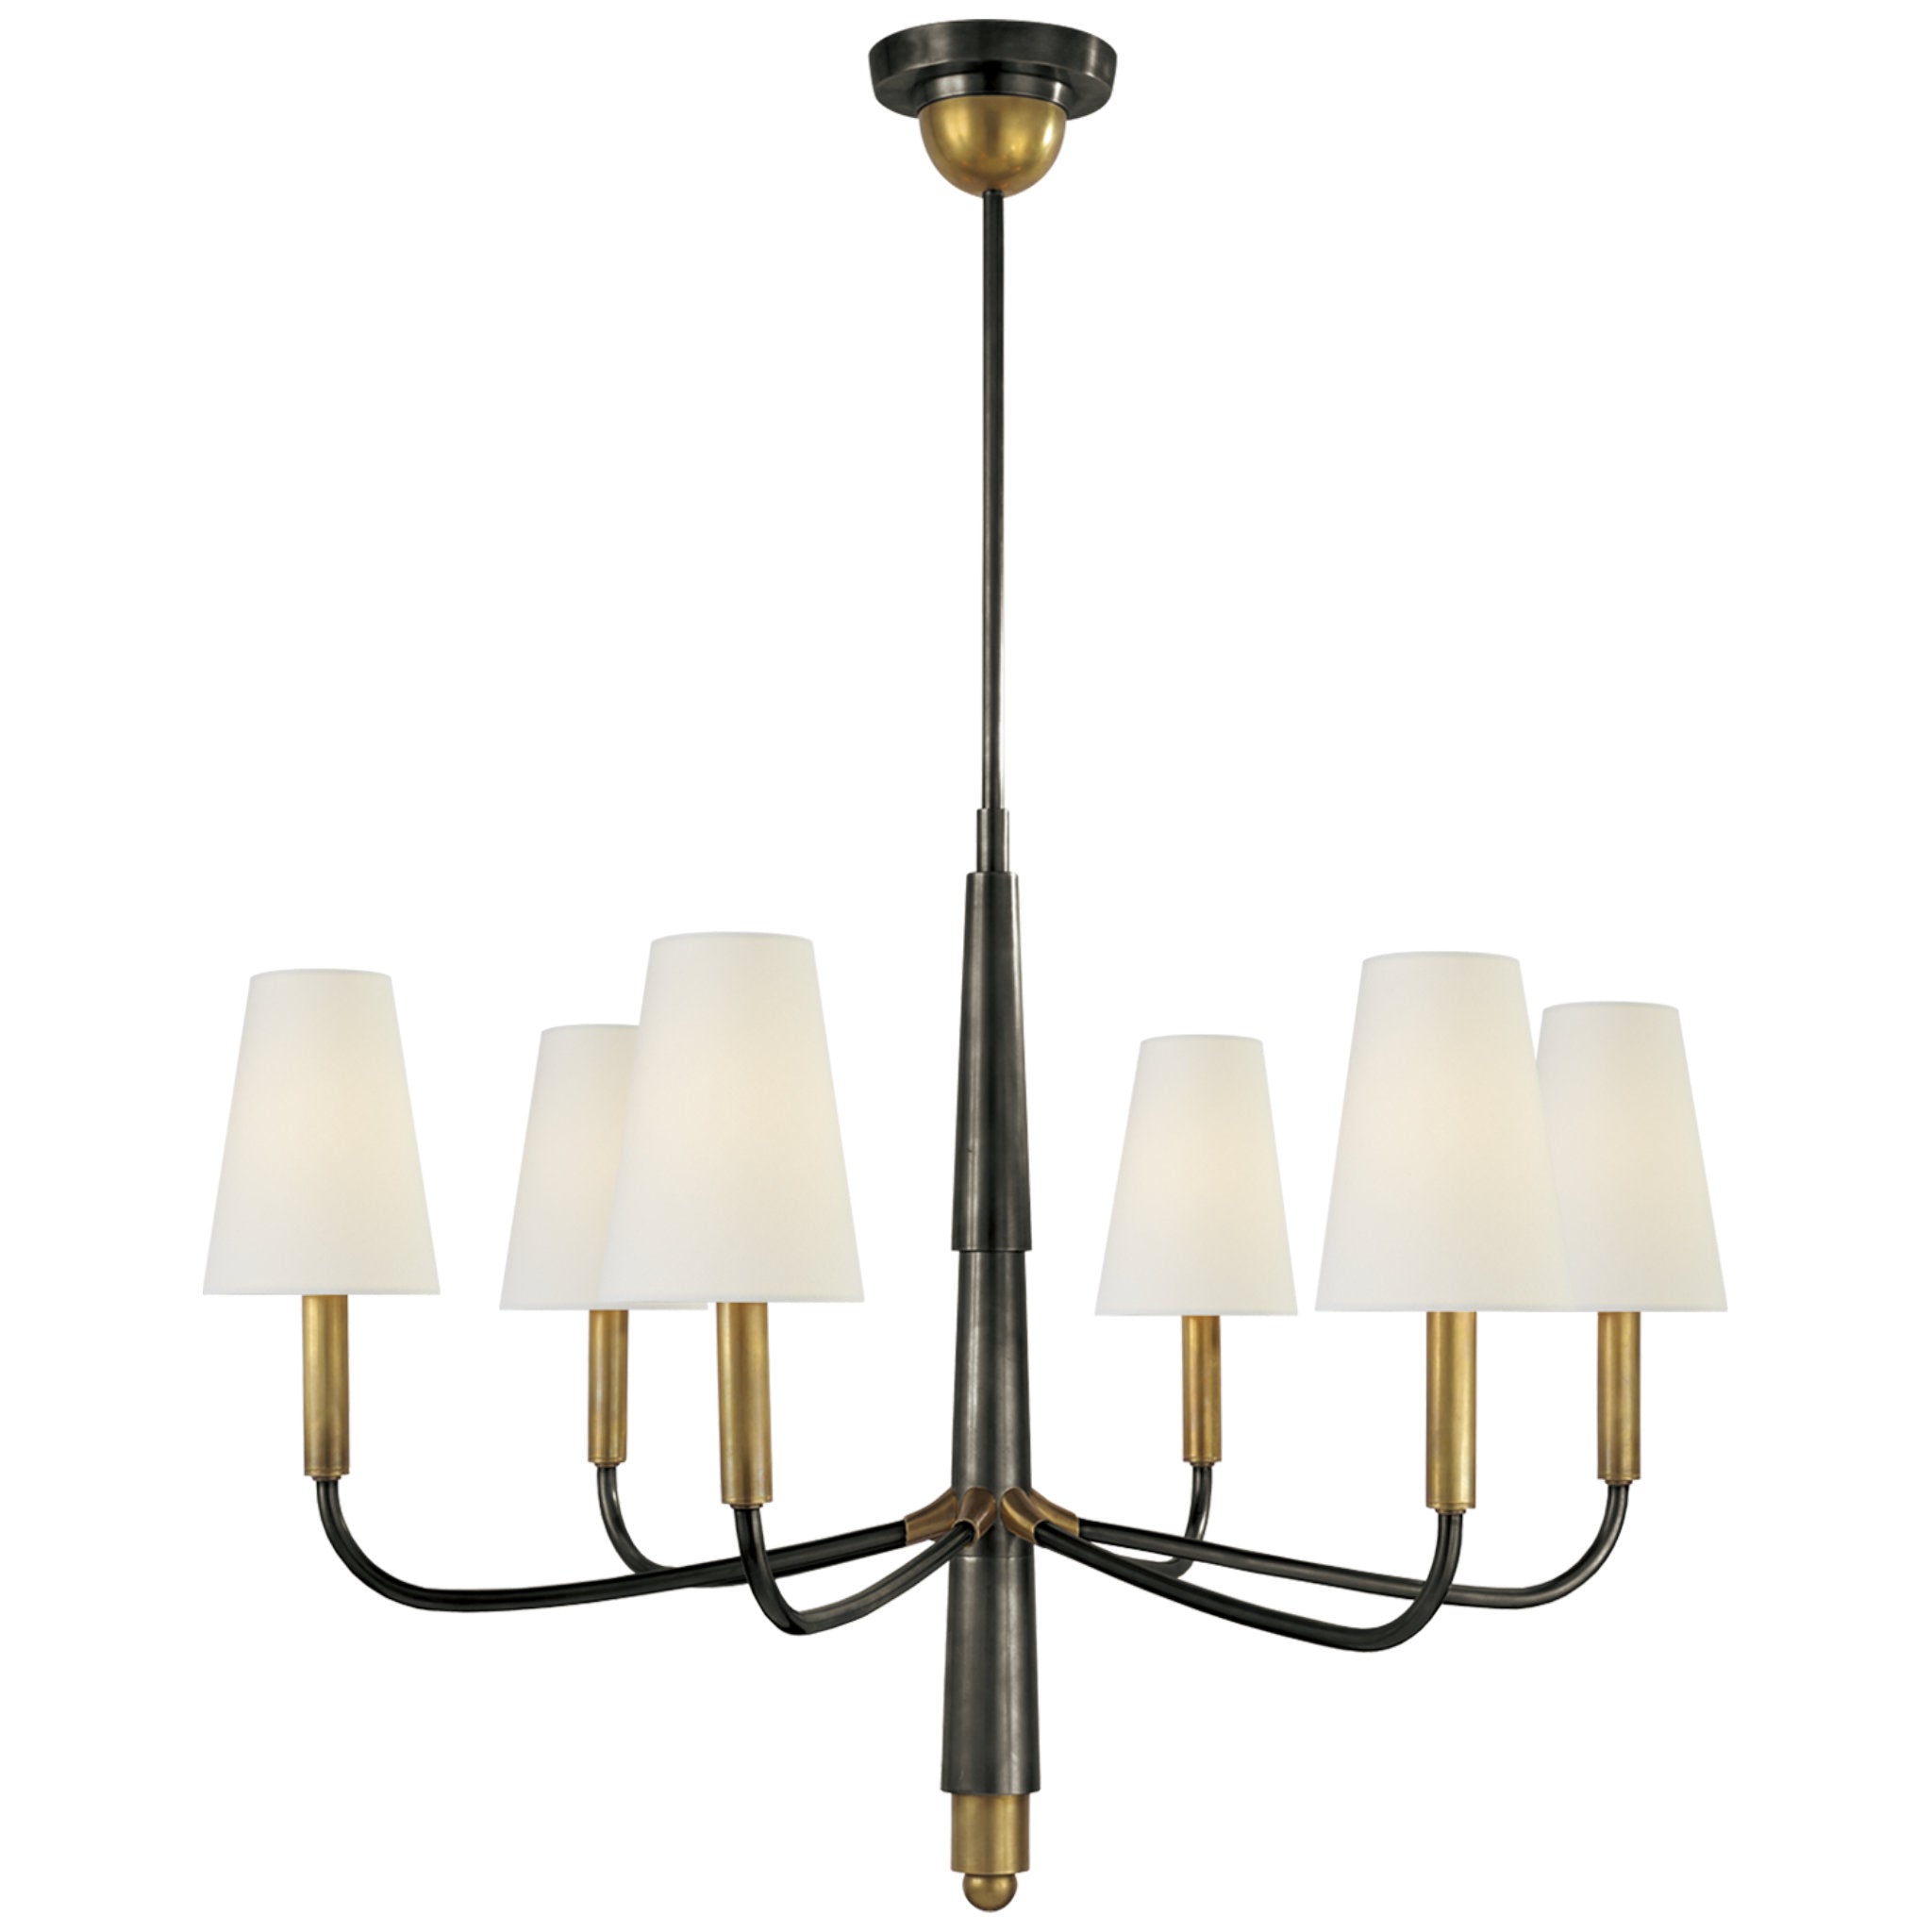 Thomas O'Brien Vendome Large Chandelier in Hand-Rubbed Antique Brass w